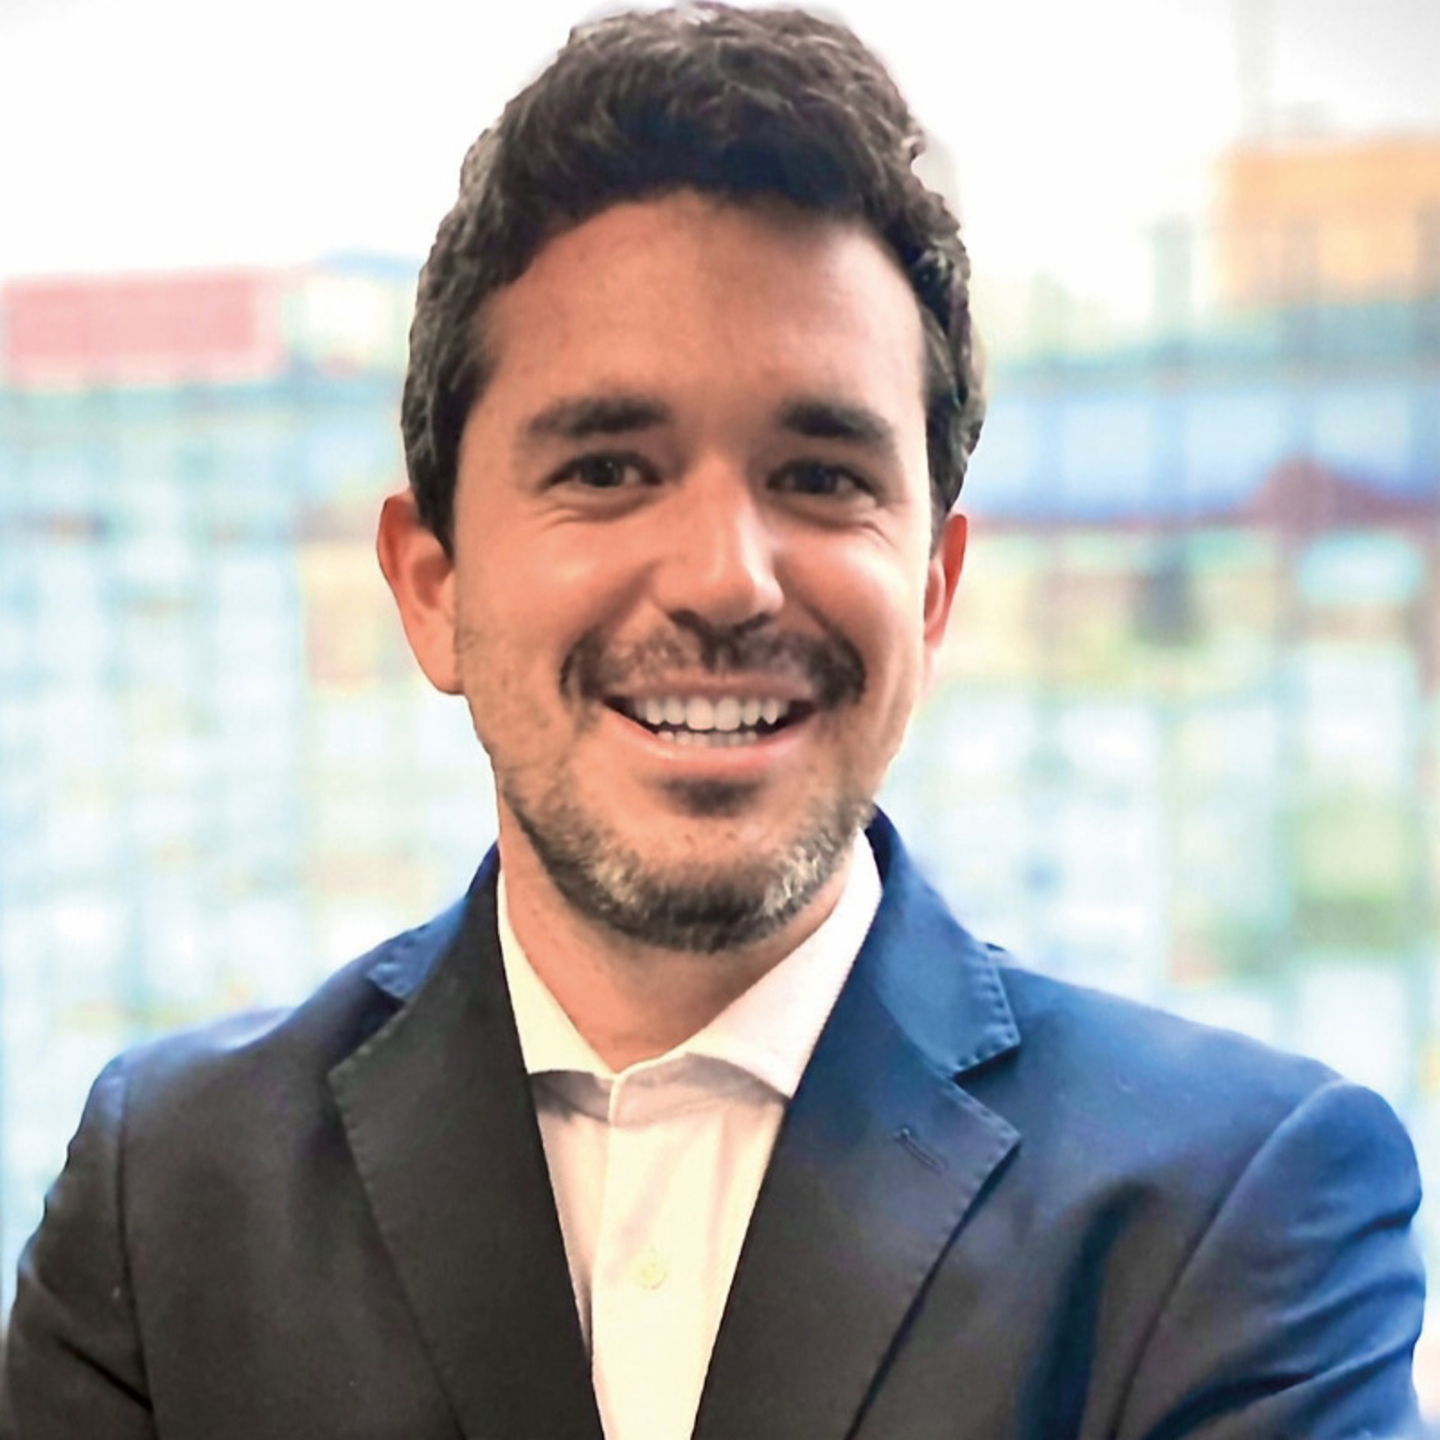 Secured debt purchase at EOS: Agustín Lozano Meléndez-Valdés, Secured Consultant at EOS Spain